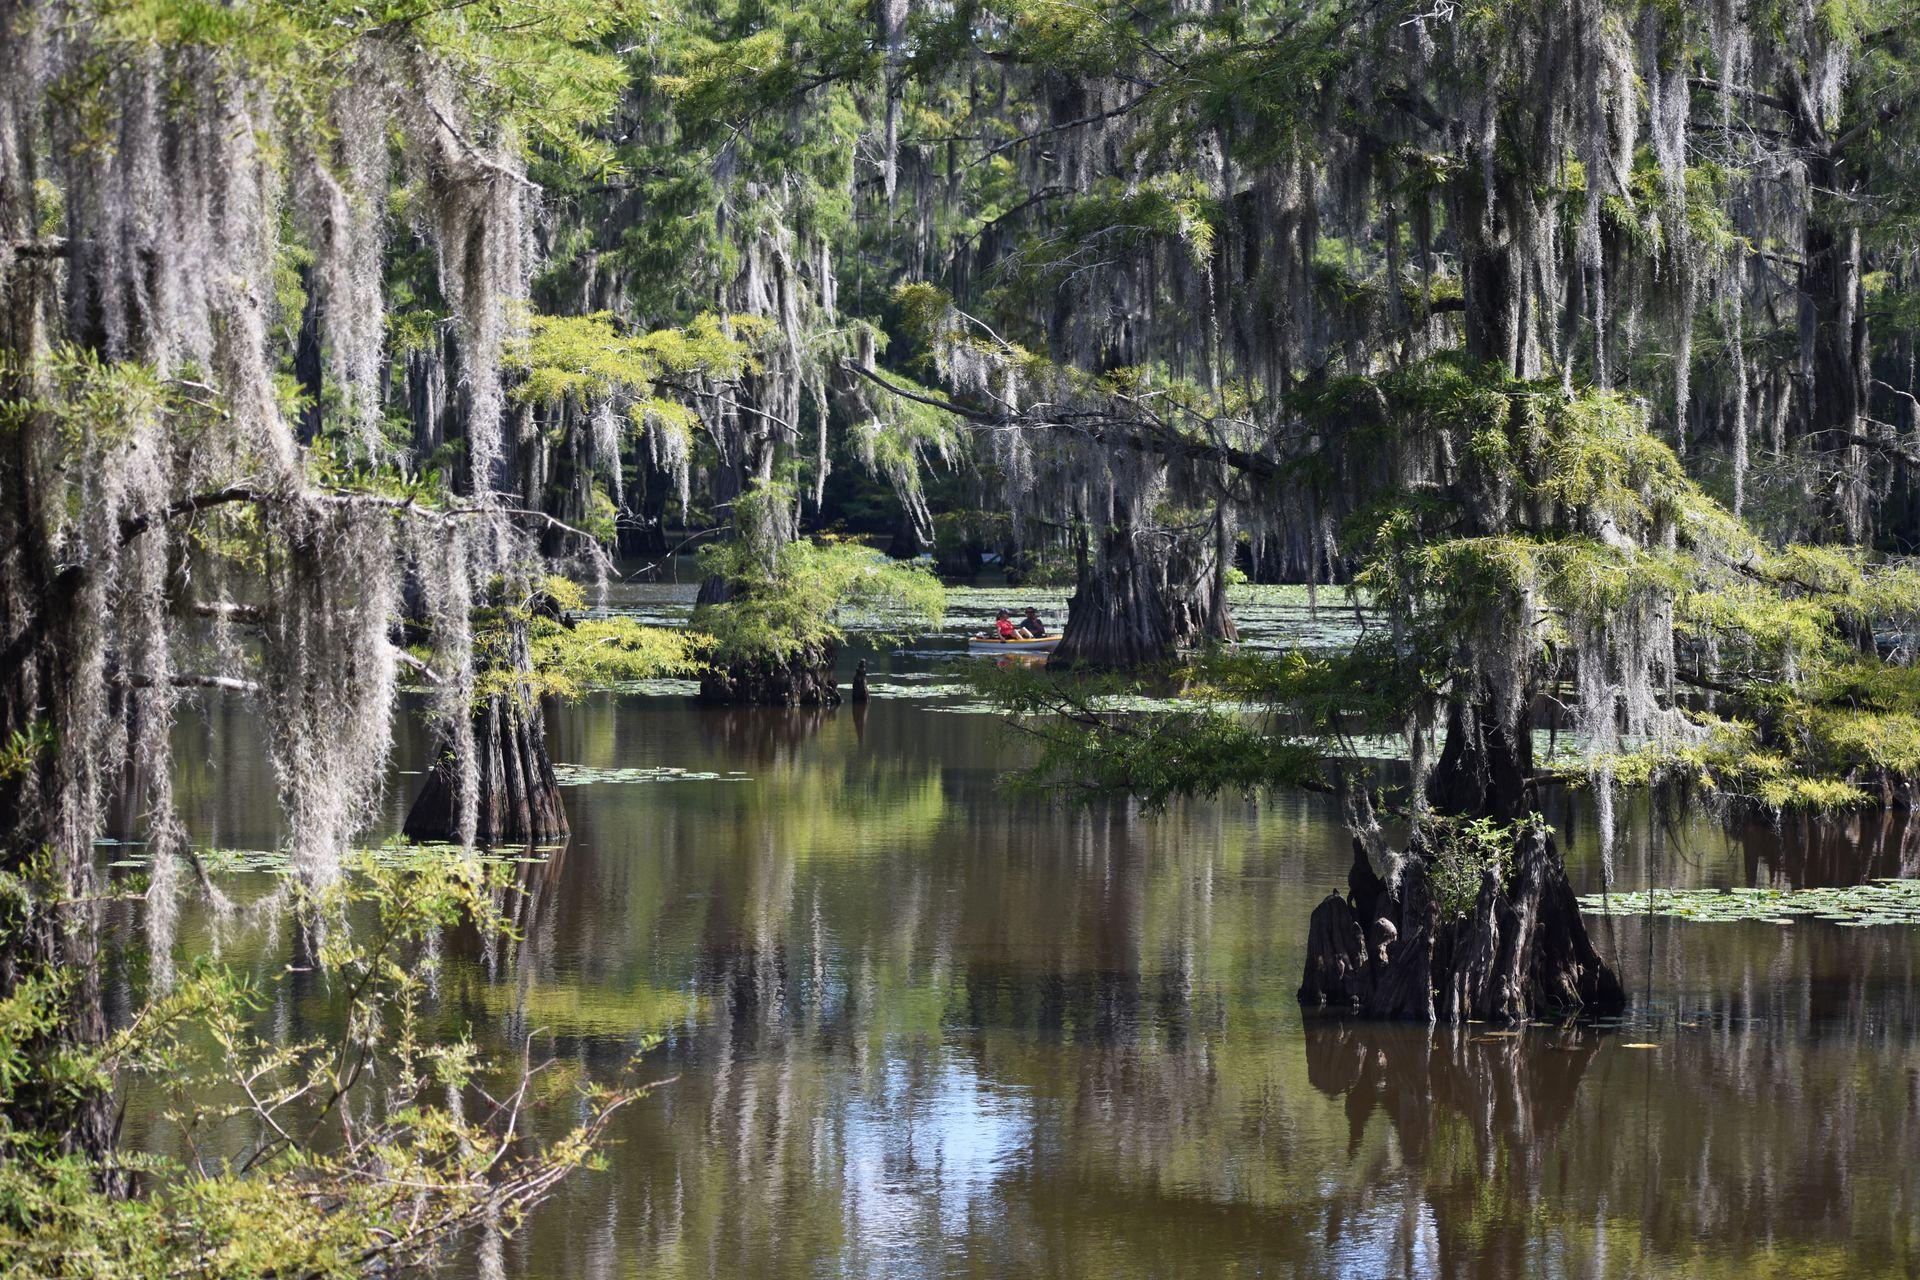 A view of Mill Pond in Caddo Lake State Park with some canoes in the distance among giant cypress trees.